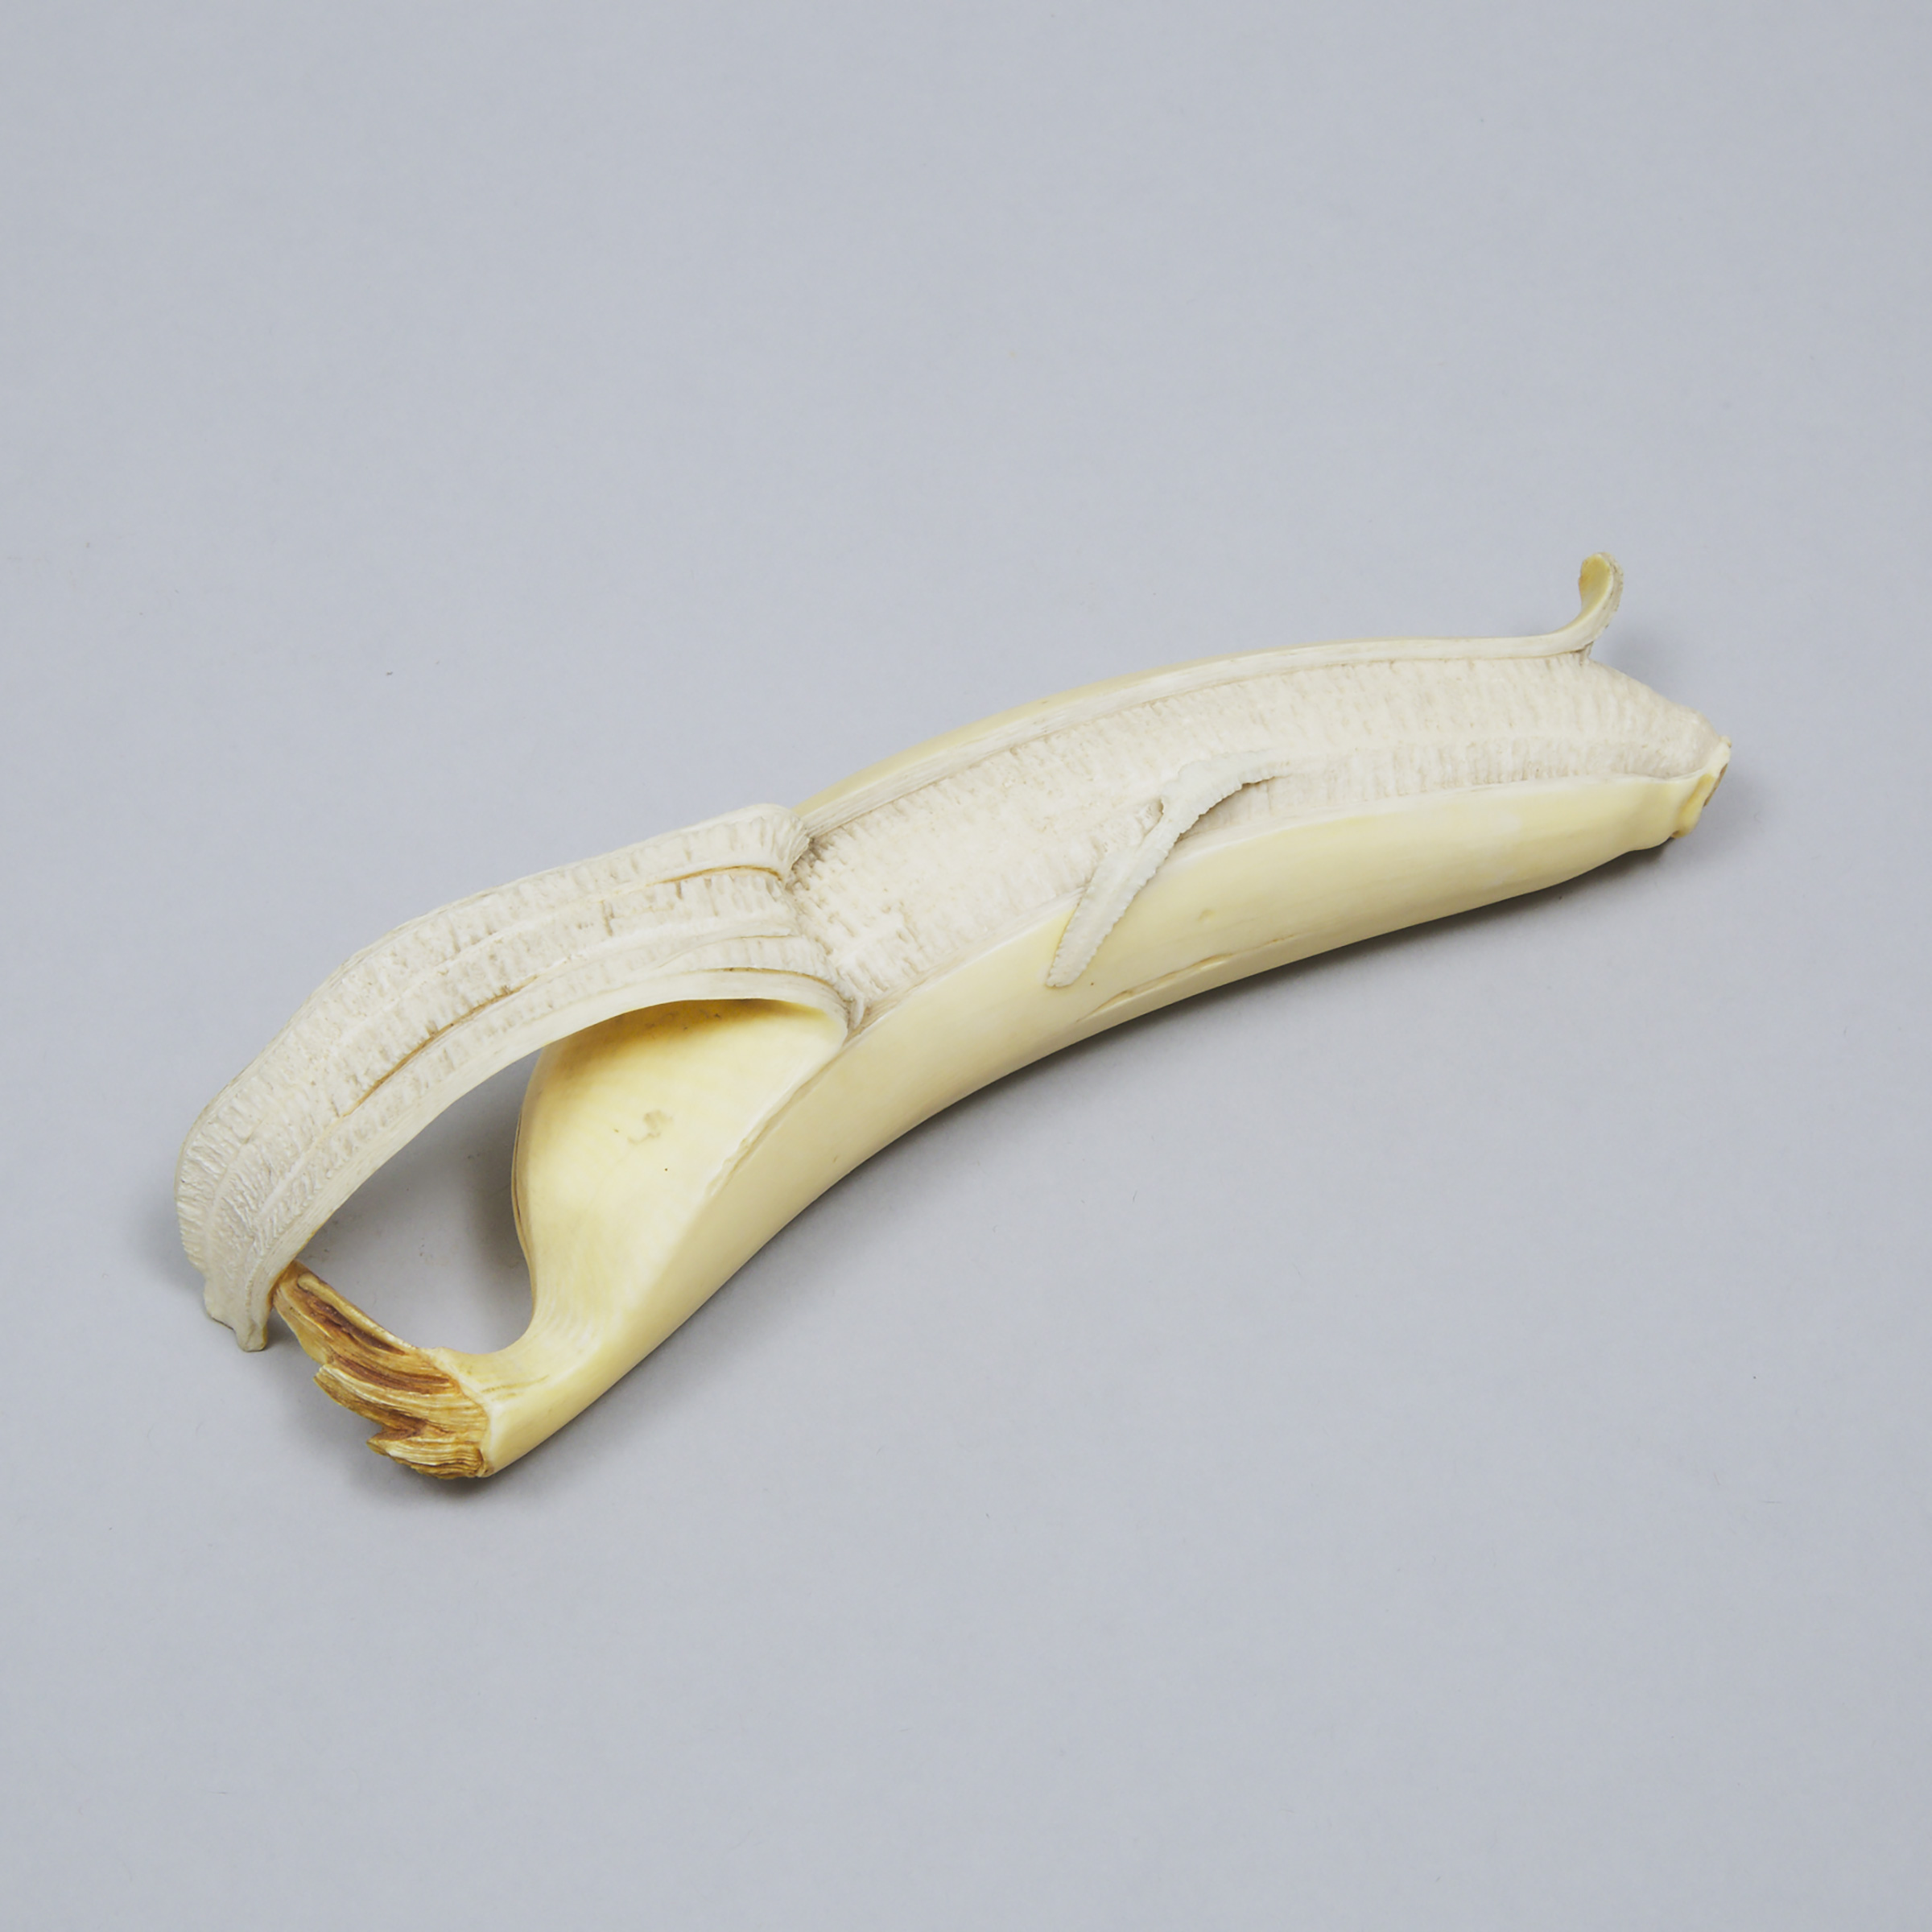 Japanese Carved and Stained Ivory Okimono Banana, Meiji Period, 19th/20th century